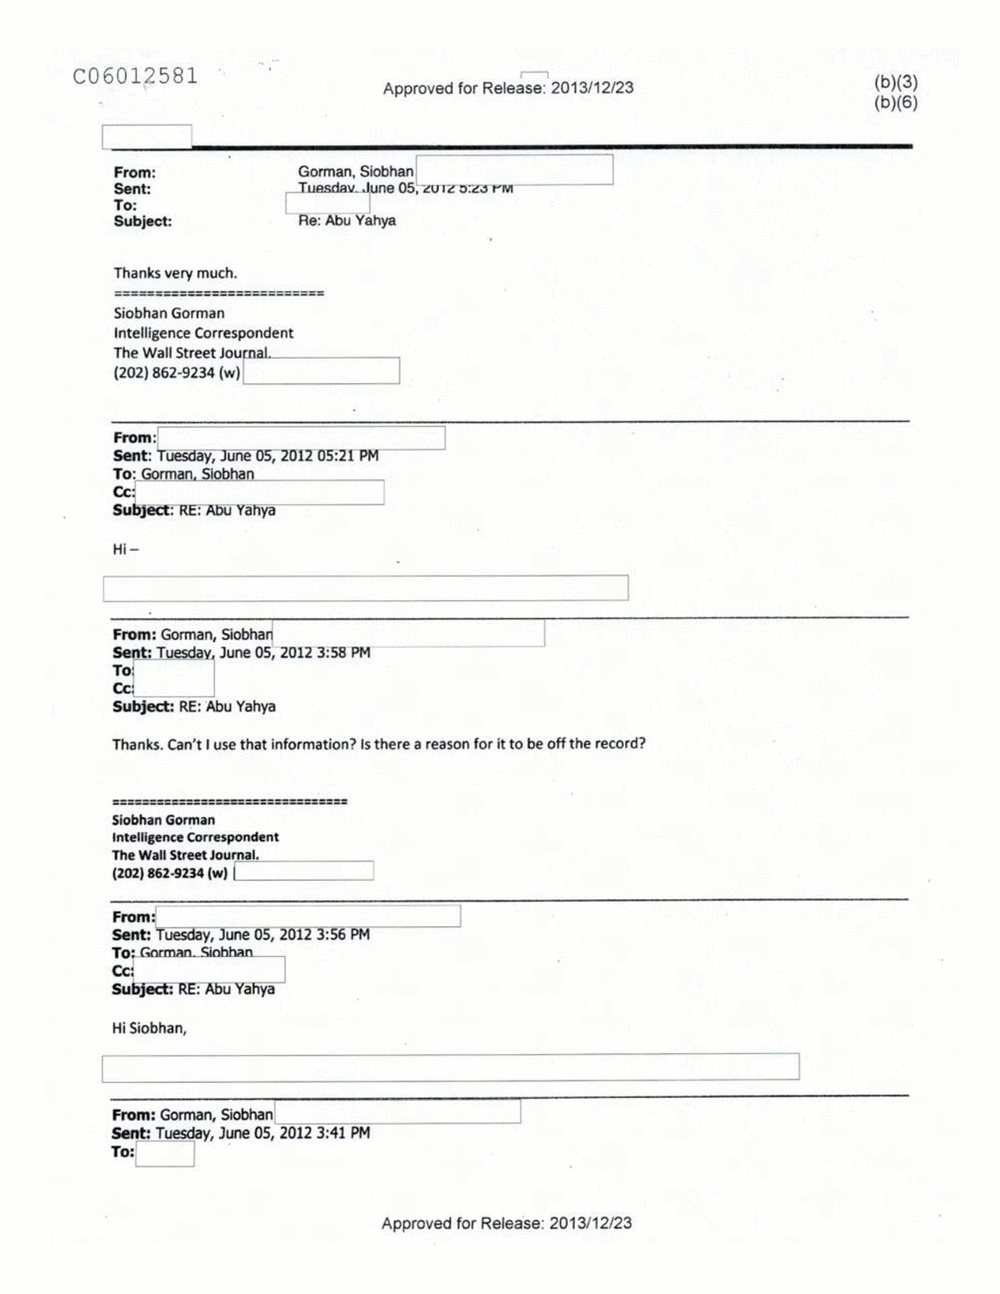 Page 120 from Email Correspondence Between Reporters and CIA Flacks